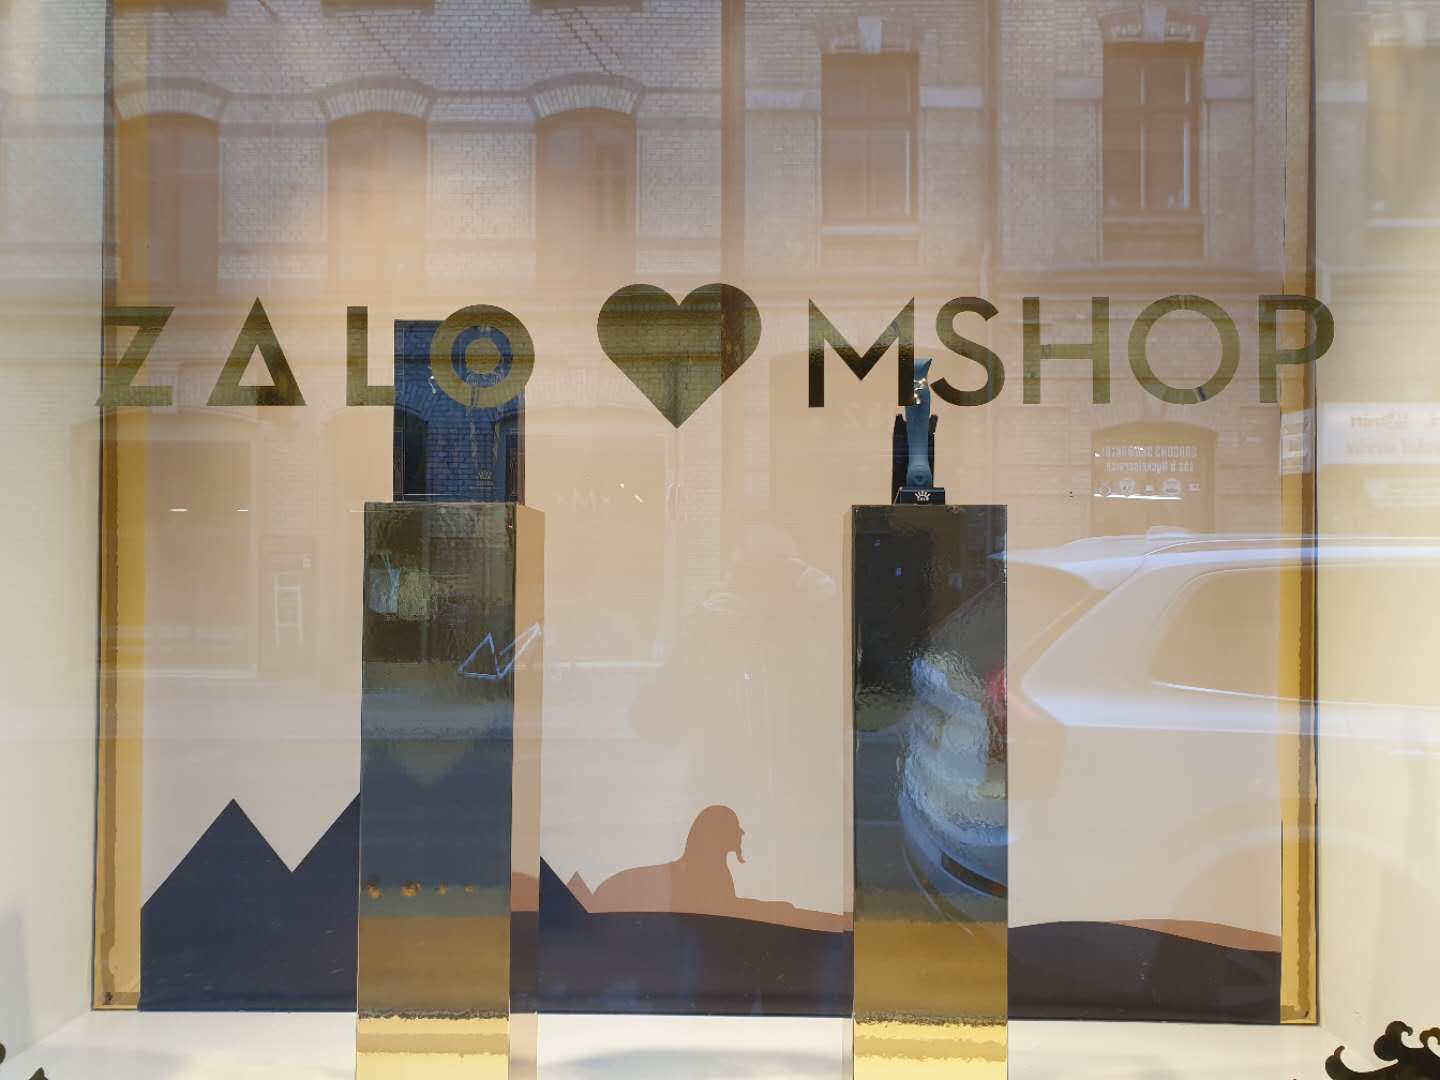 ZALO in Sweden boutiques